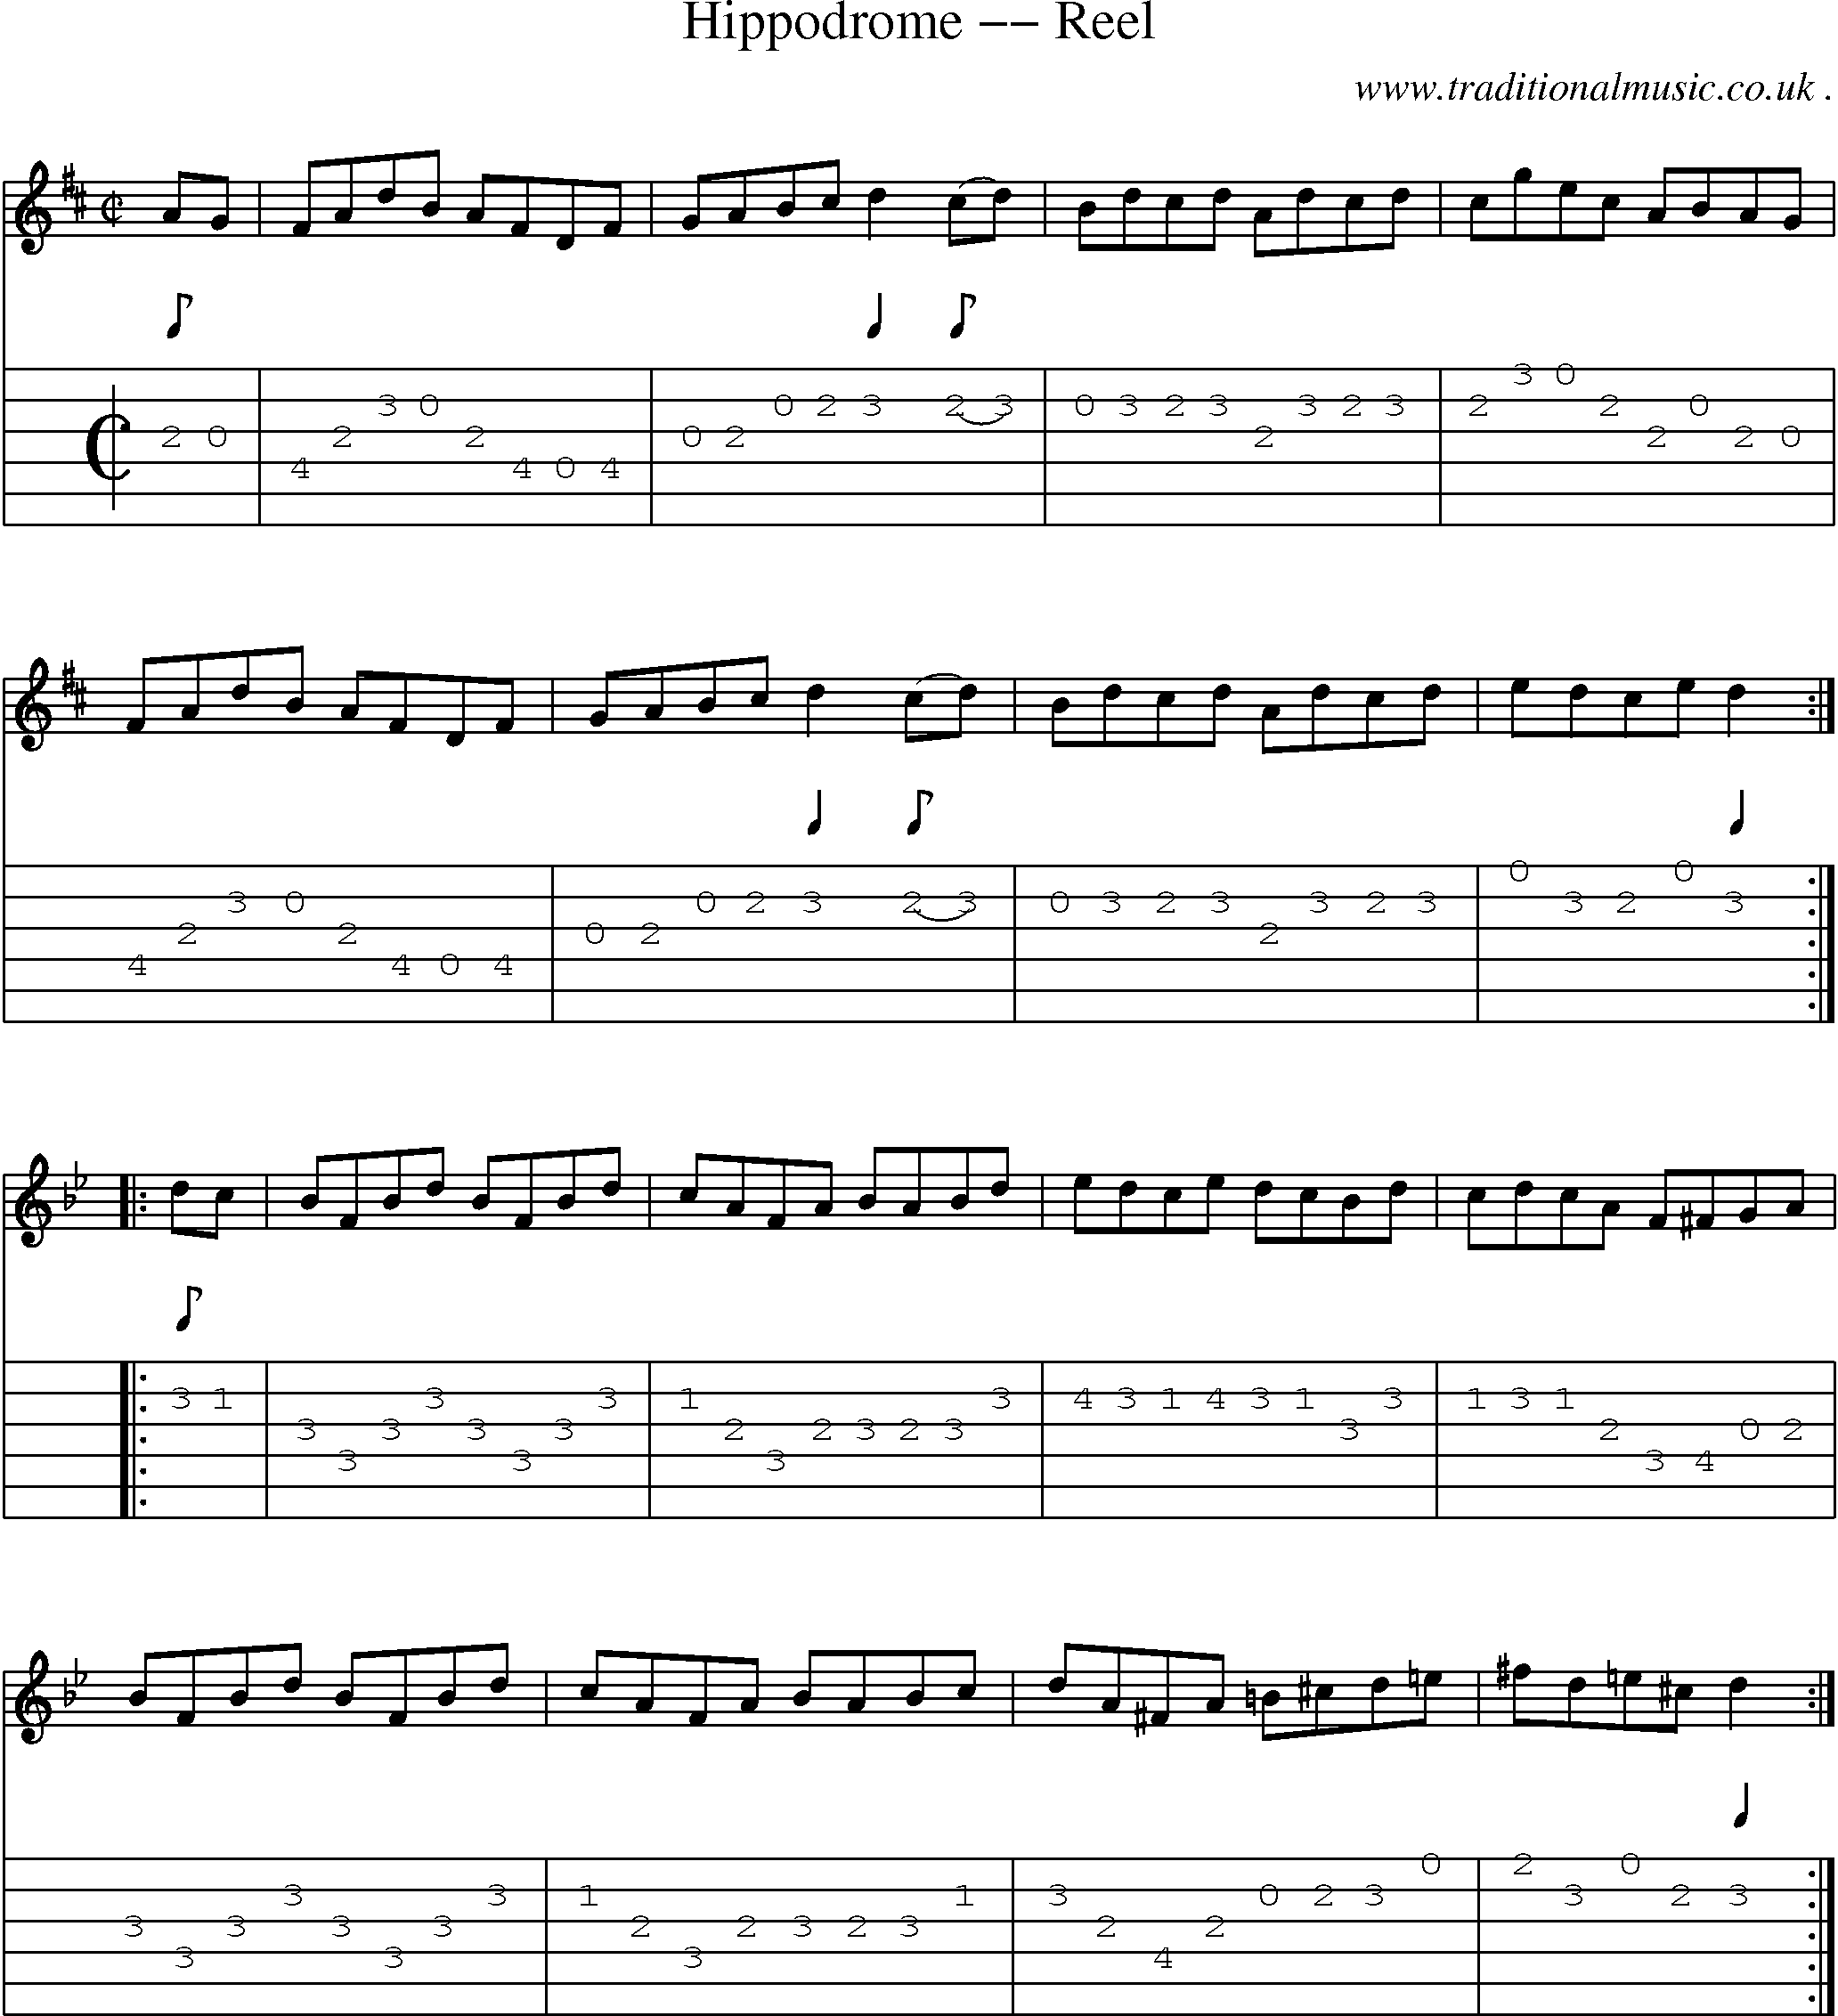 Music Score and Guitar Tabs for Hippodrome Reel